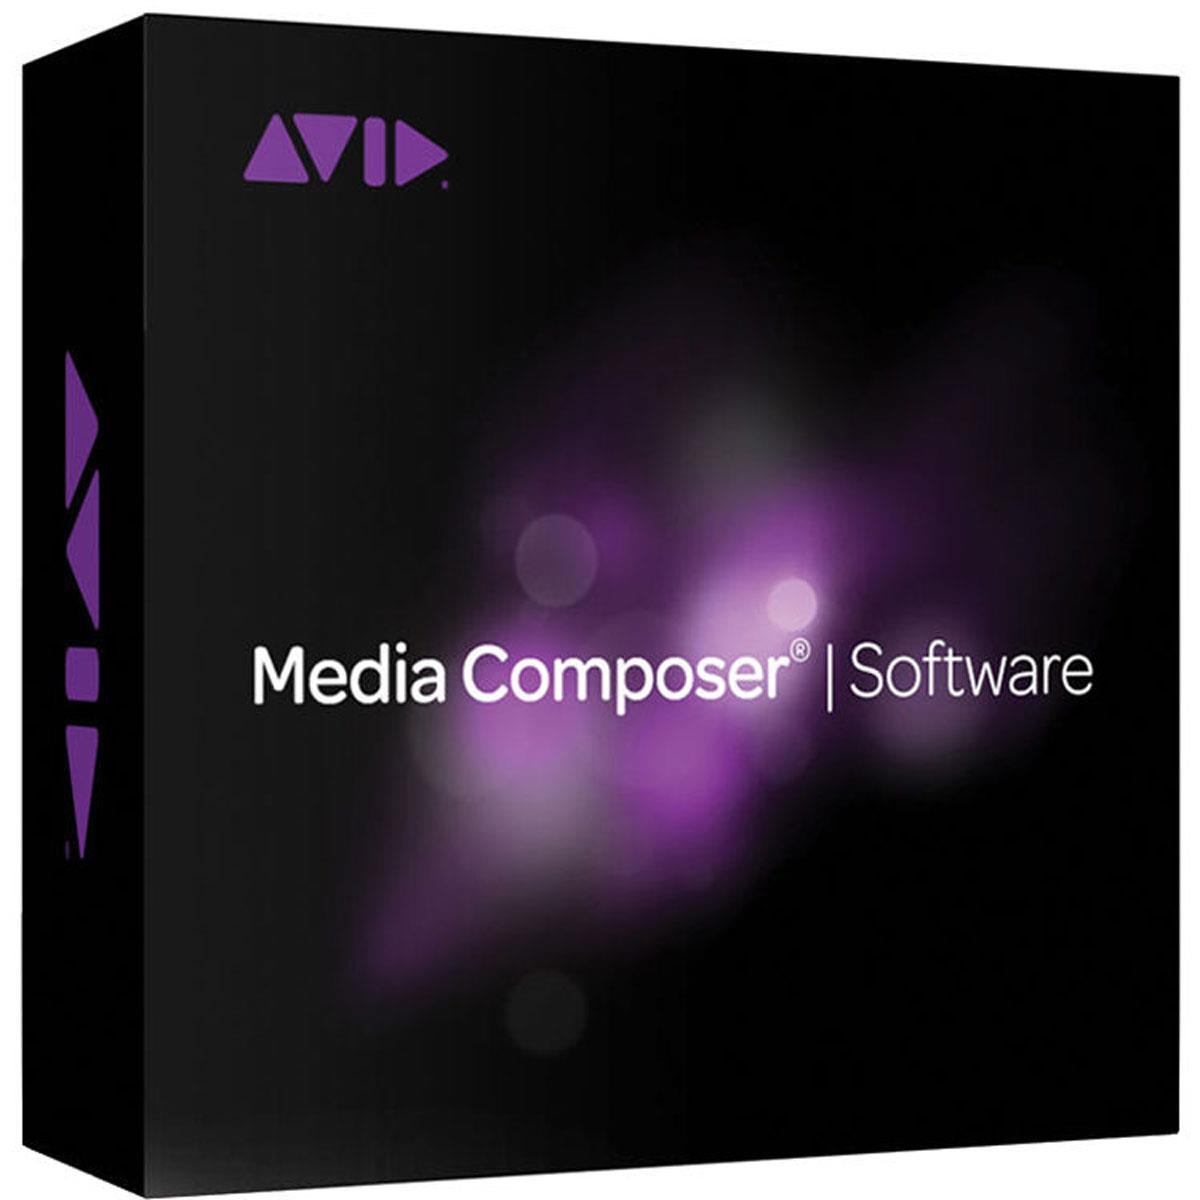 Avid Media Composer 2018 Software, 1-Year Subscription, Electronic Download -  9938-30115-00